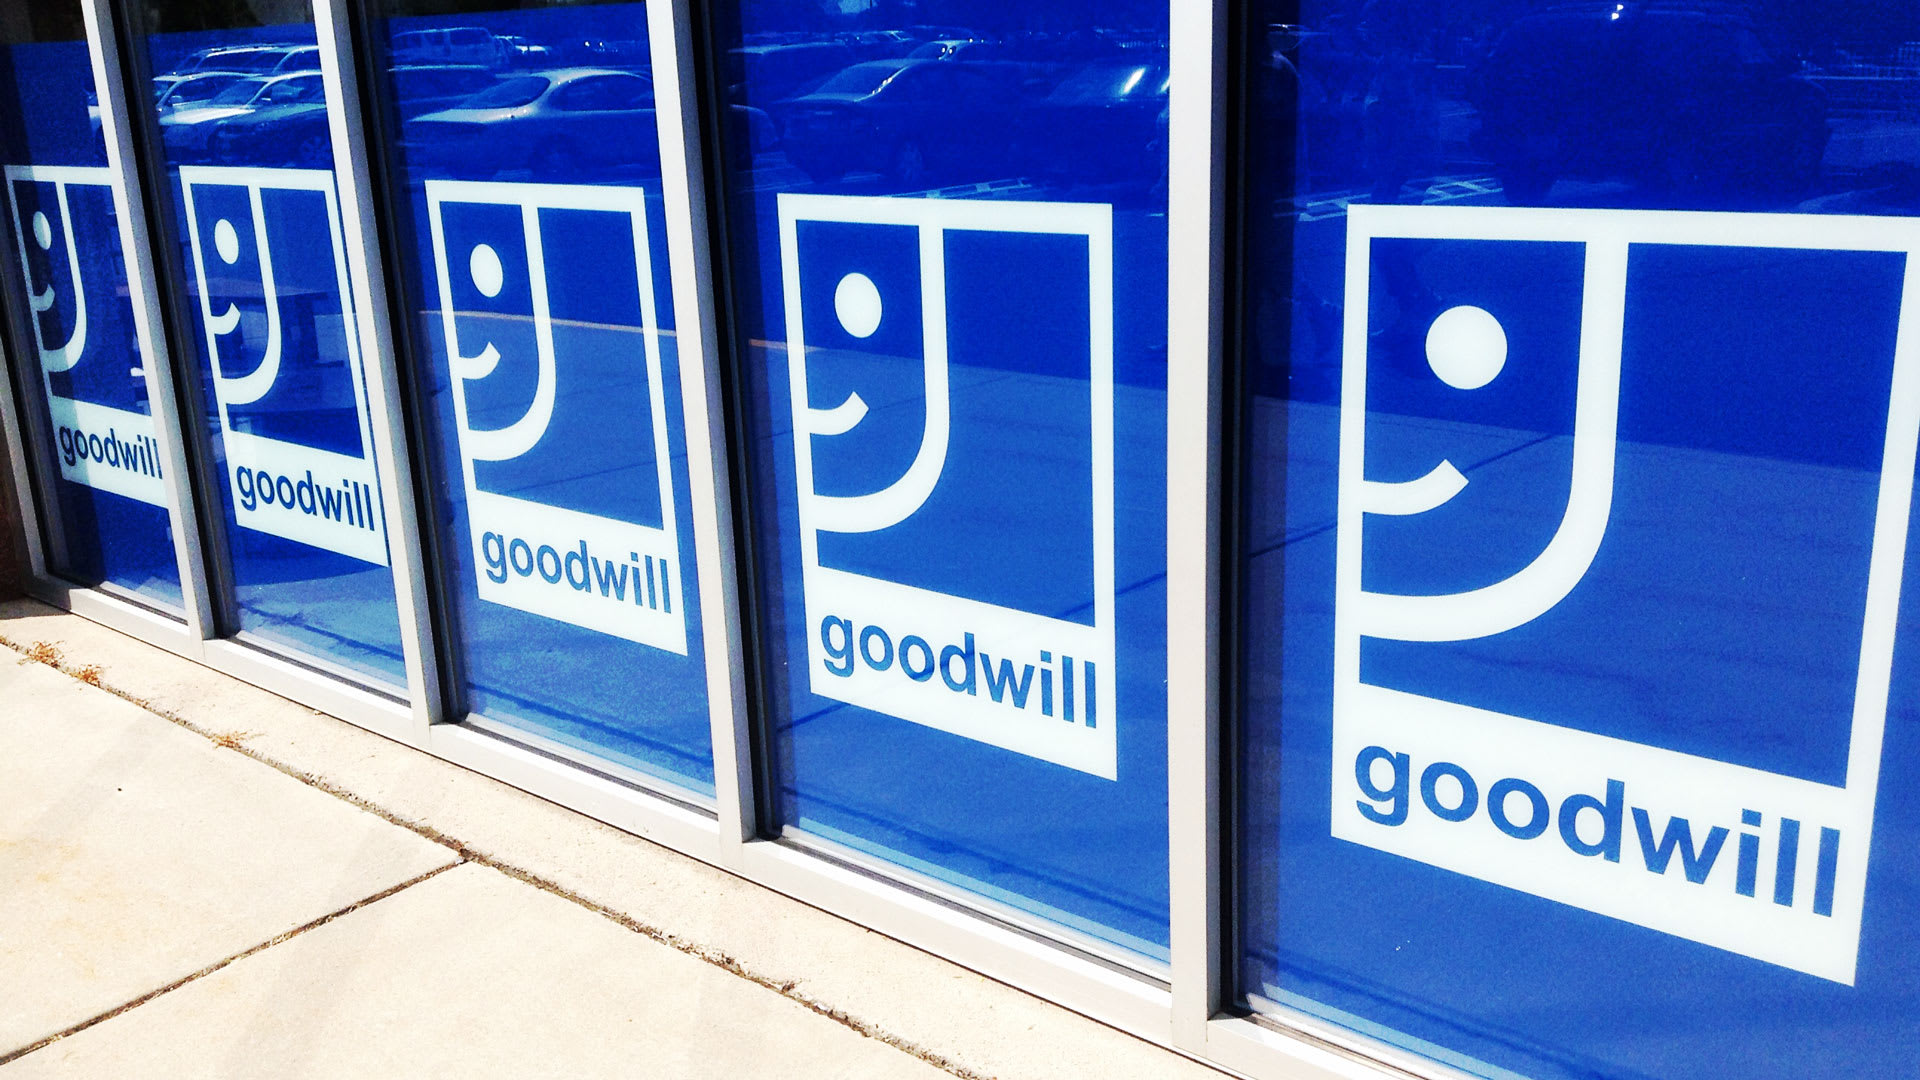 Goodwill is trying to shake off the idea that it’s a Goodwill